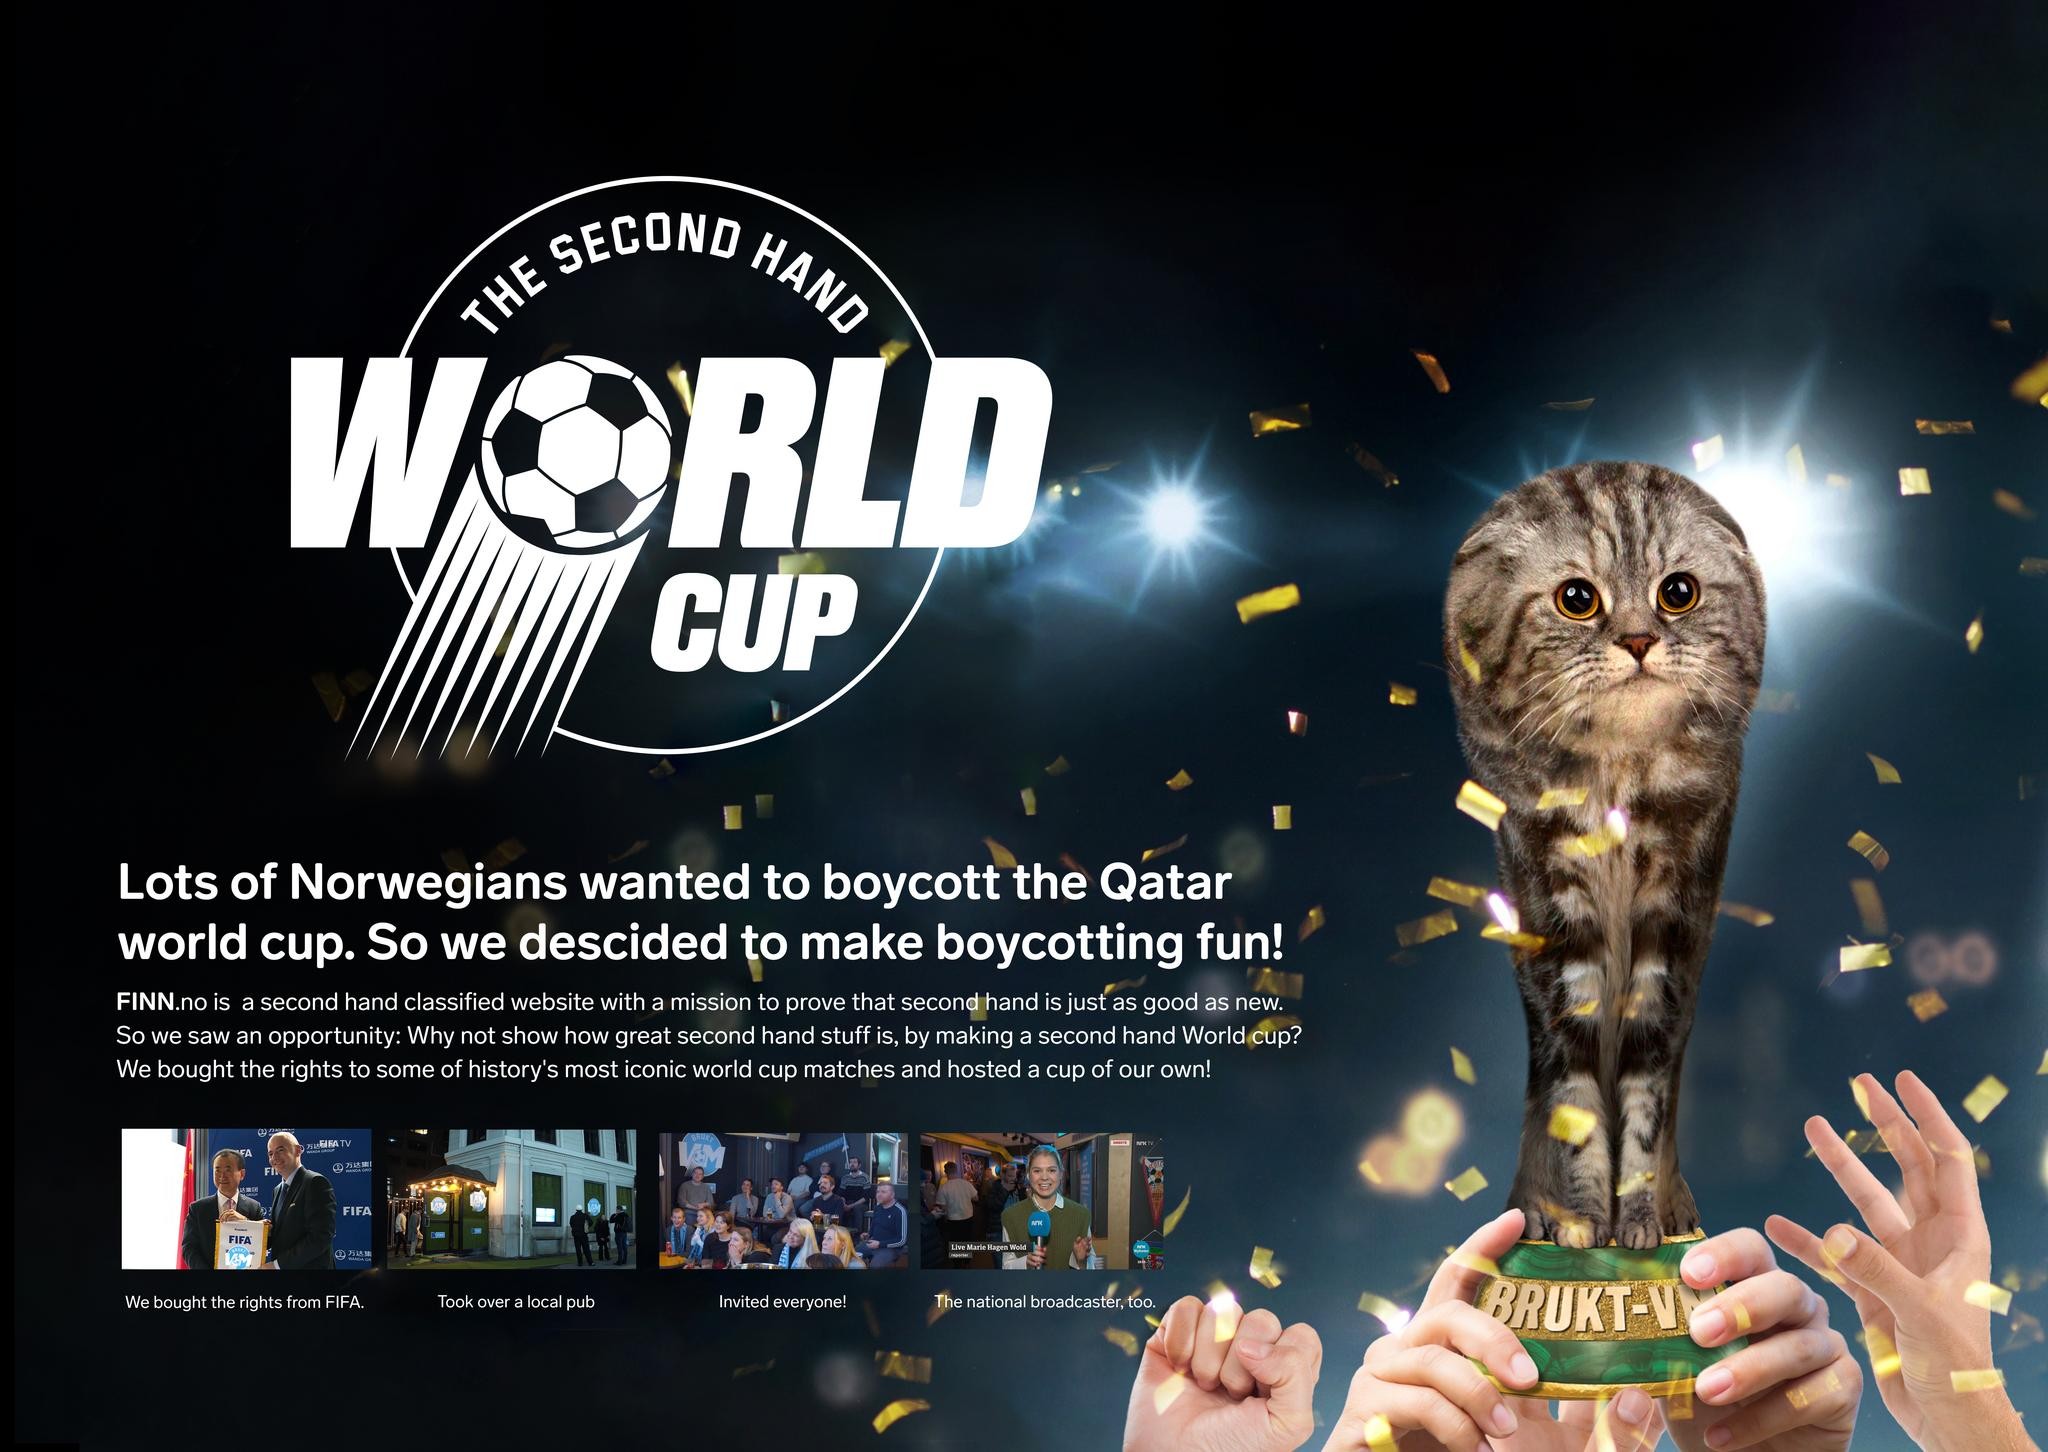 The second hand world cup